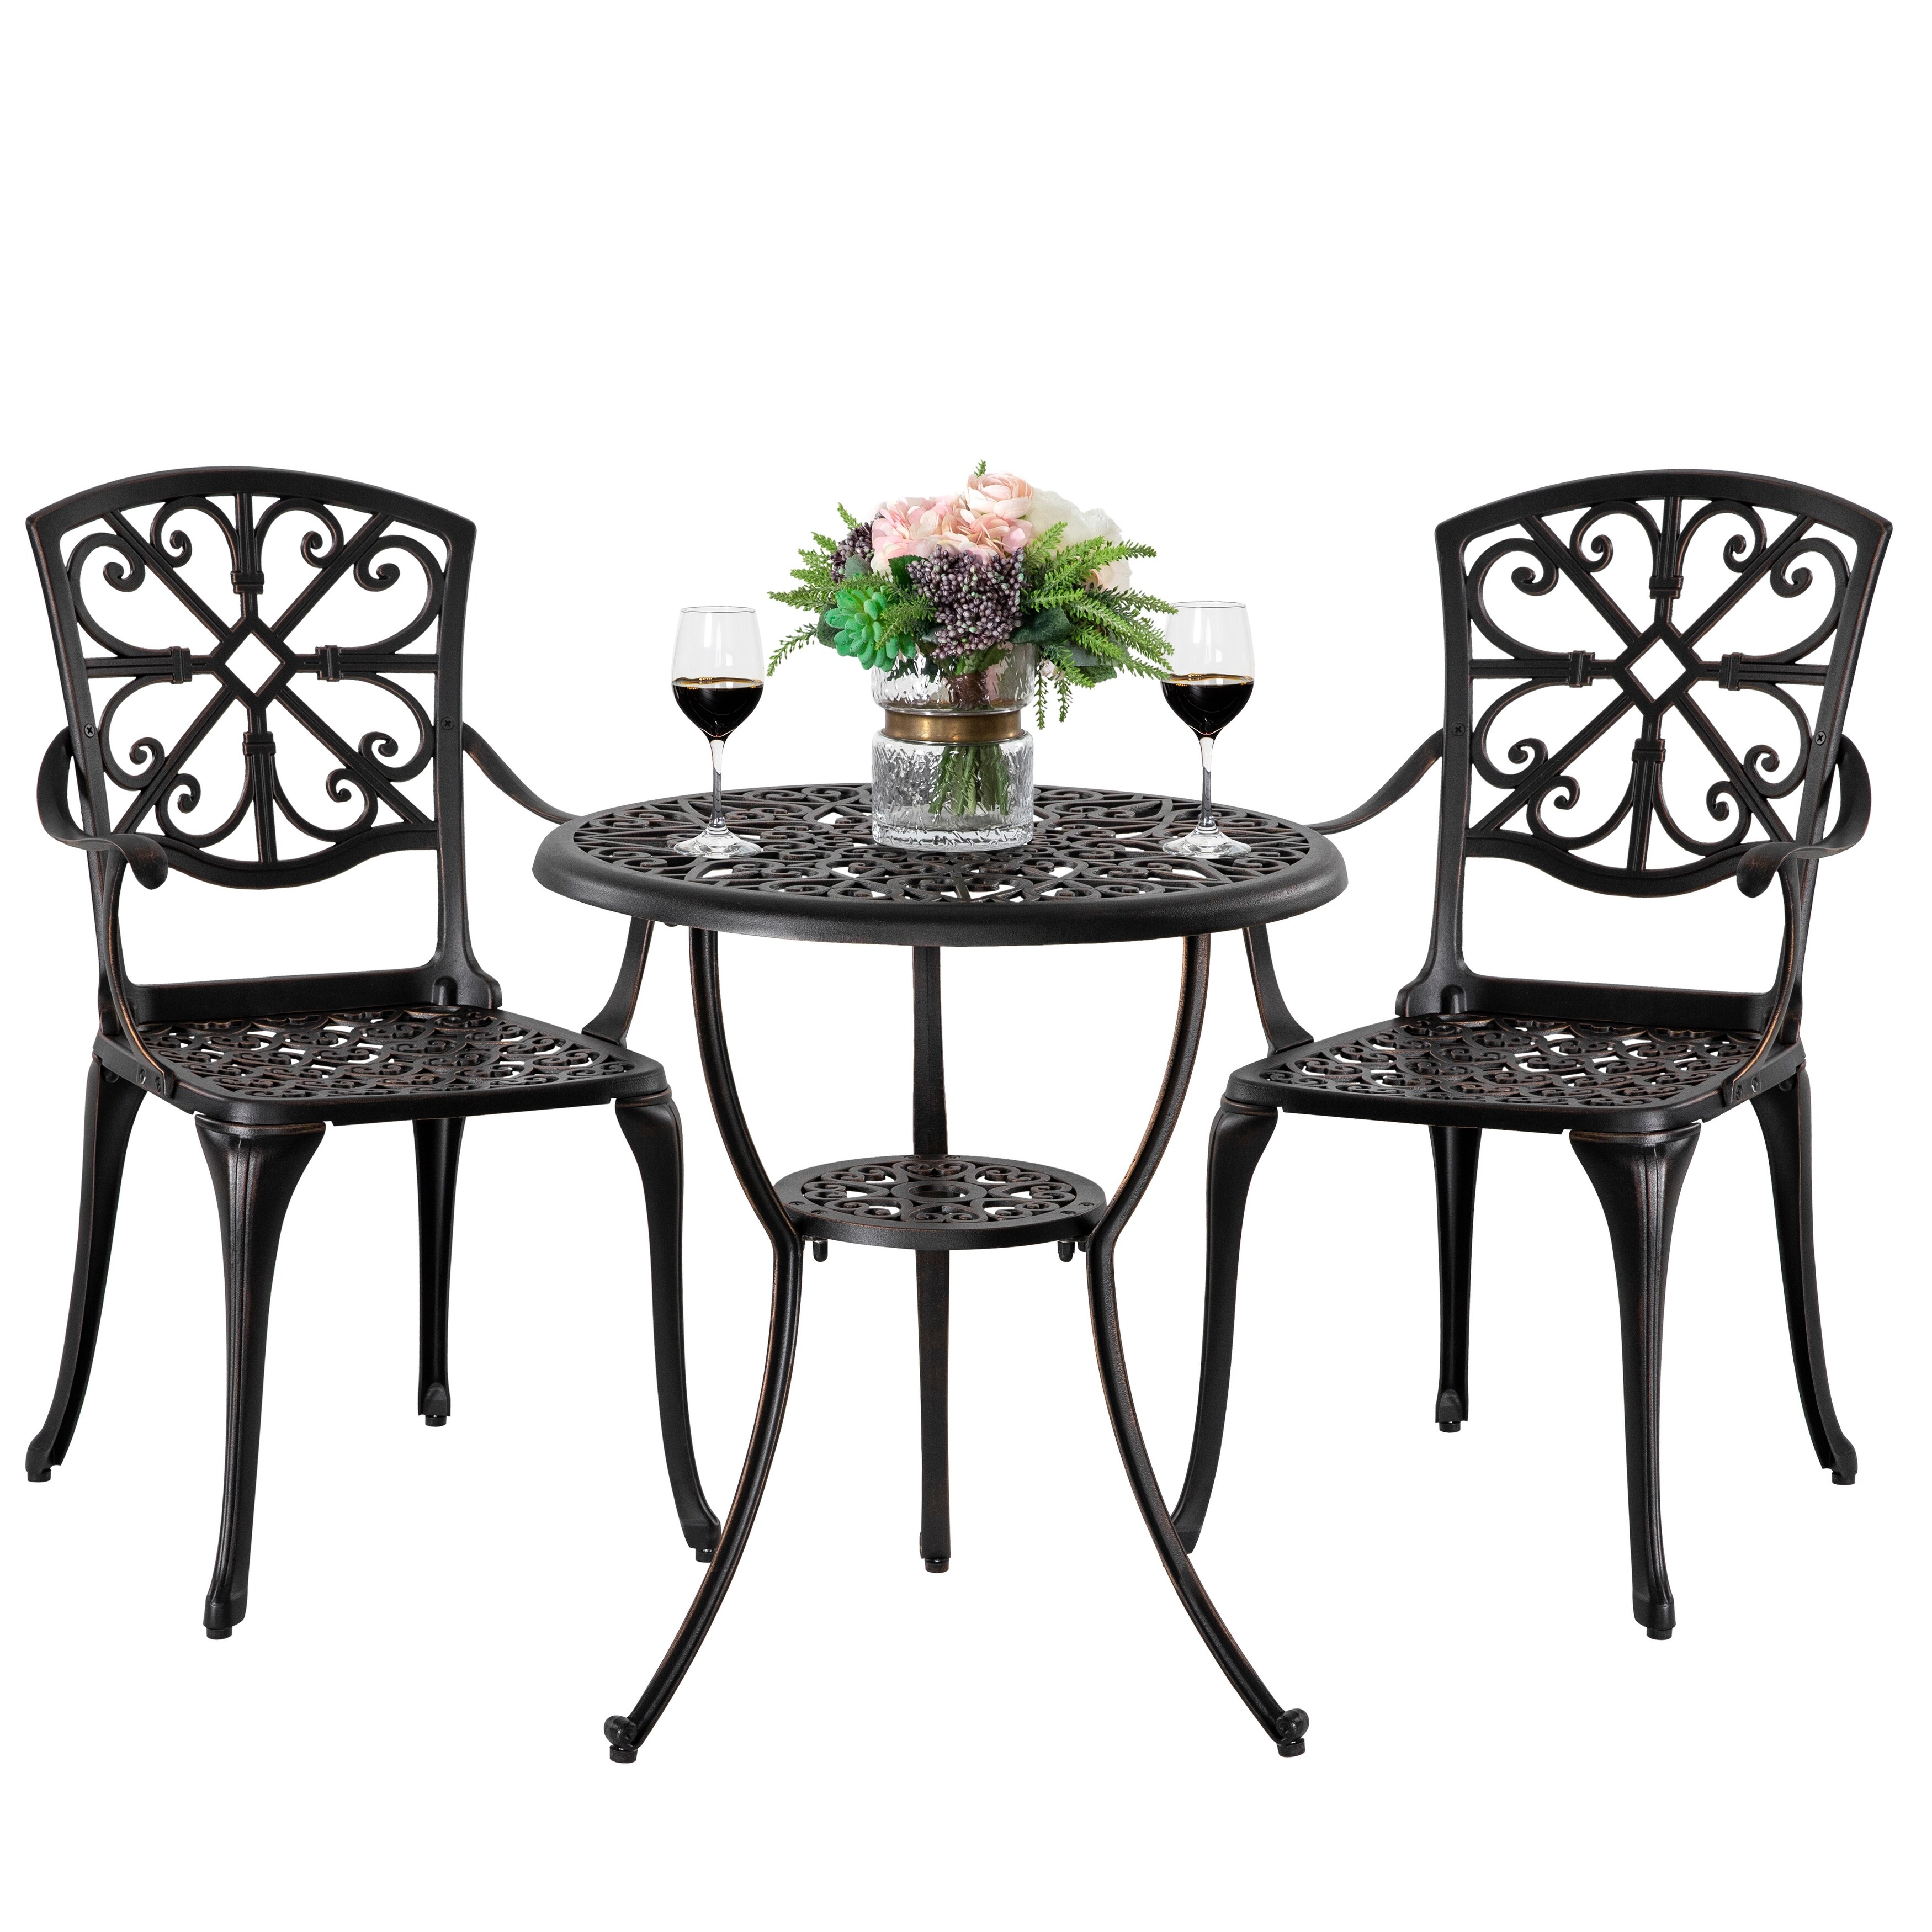 Bronze CIYOUNG Patio Furniture Rust-Resistant Table and Chairs Outdoor Cast Aluminum 3 Piece Leaf Set 